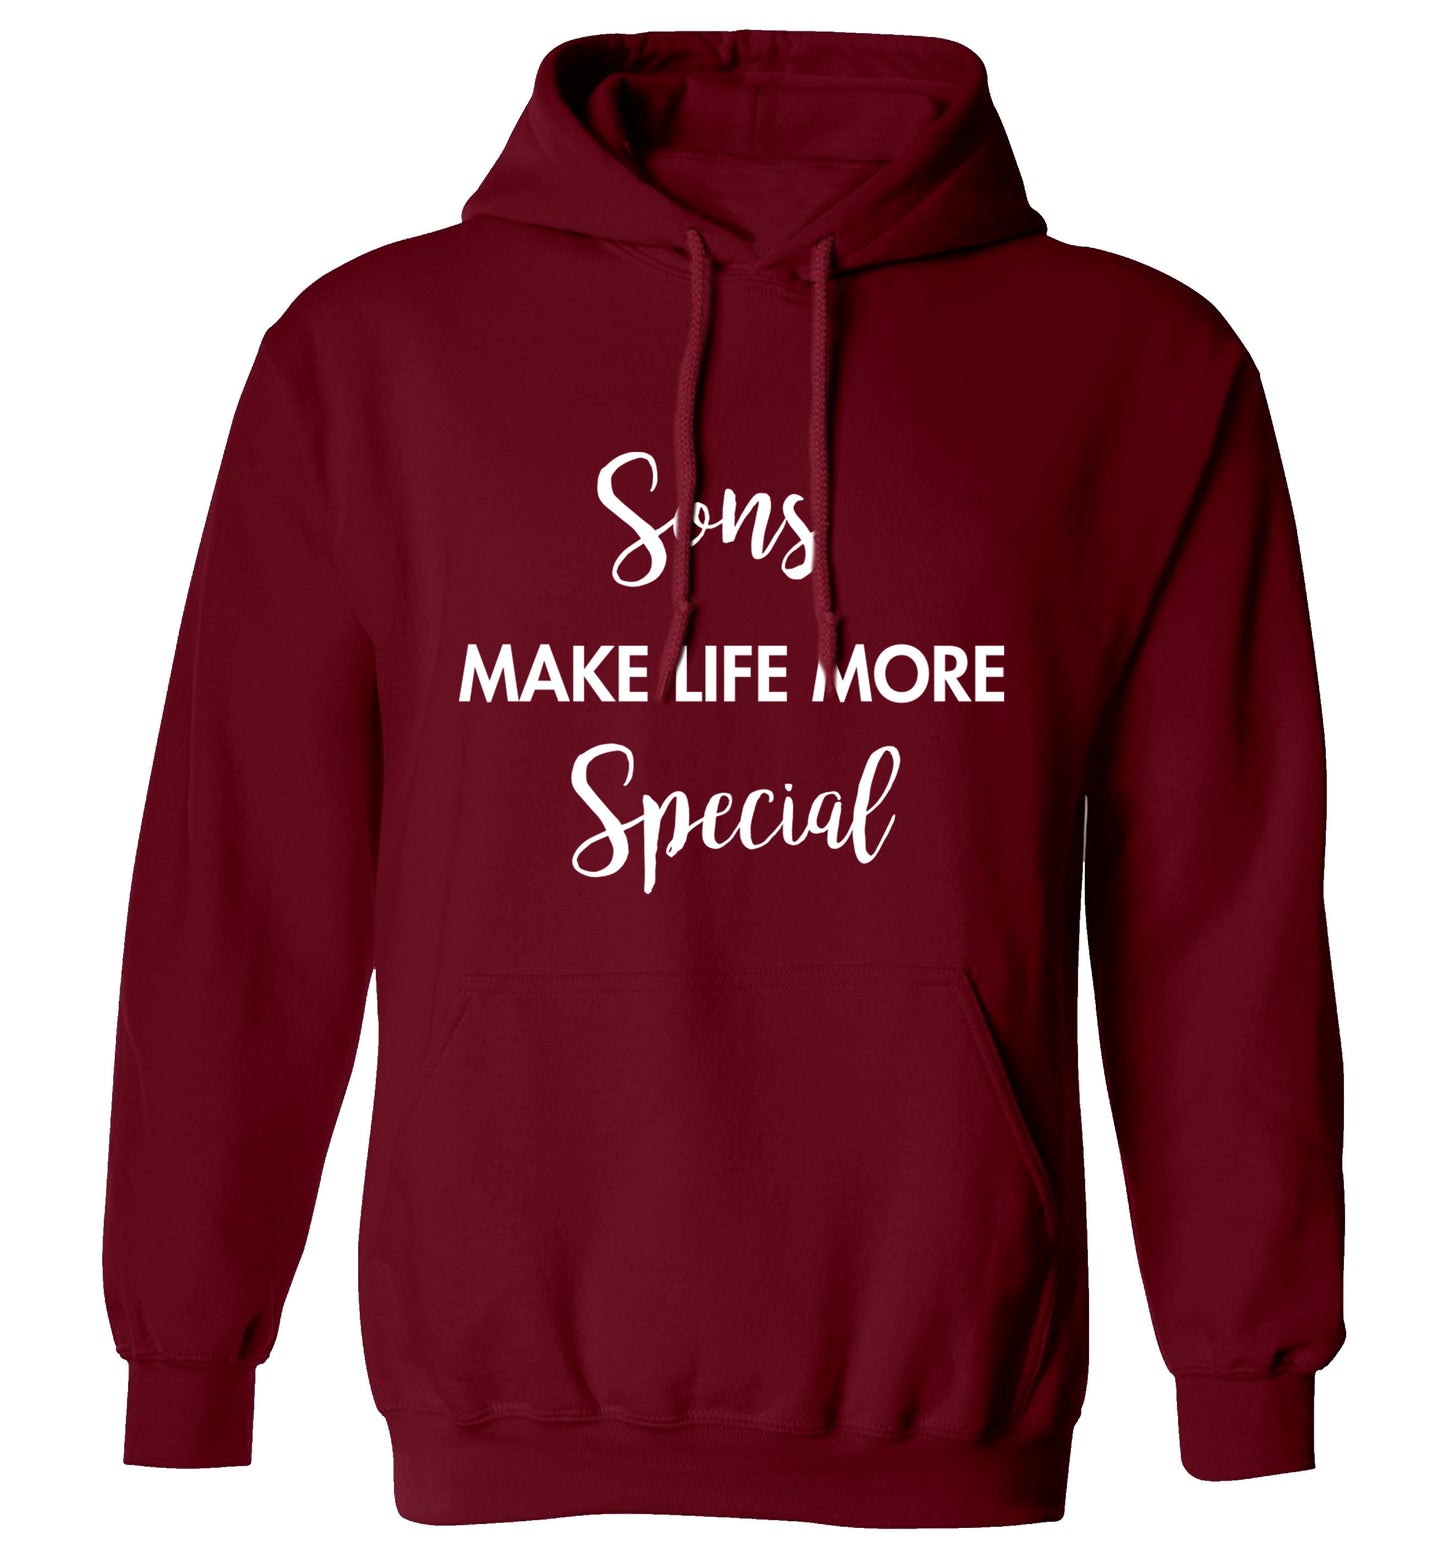 Daughters make life more special adults unisex maroon hoodie 2XL